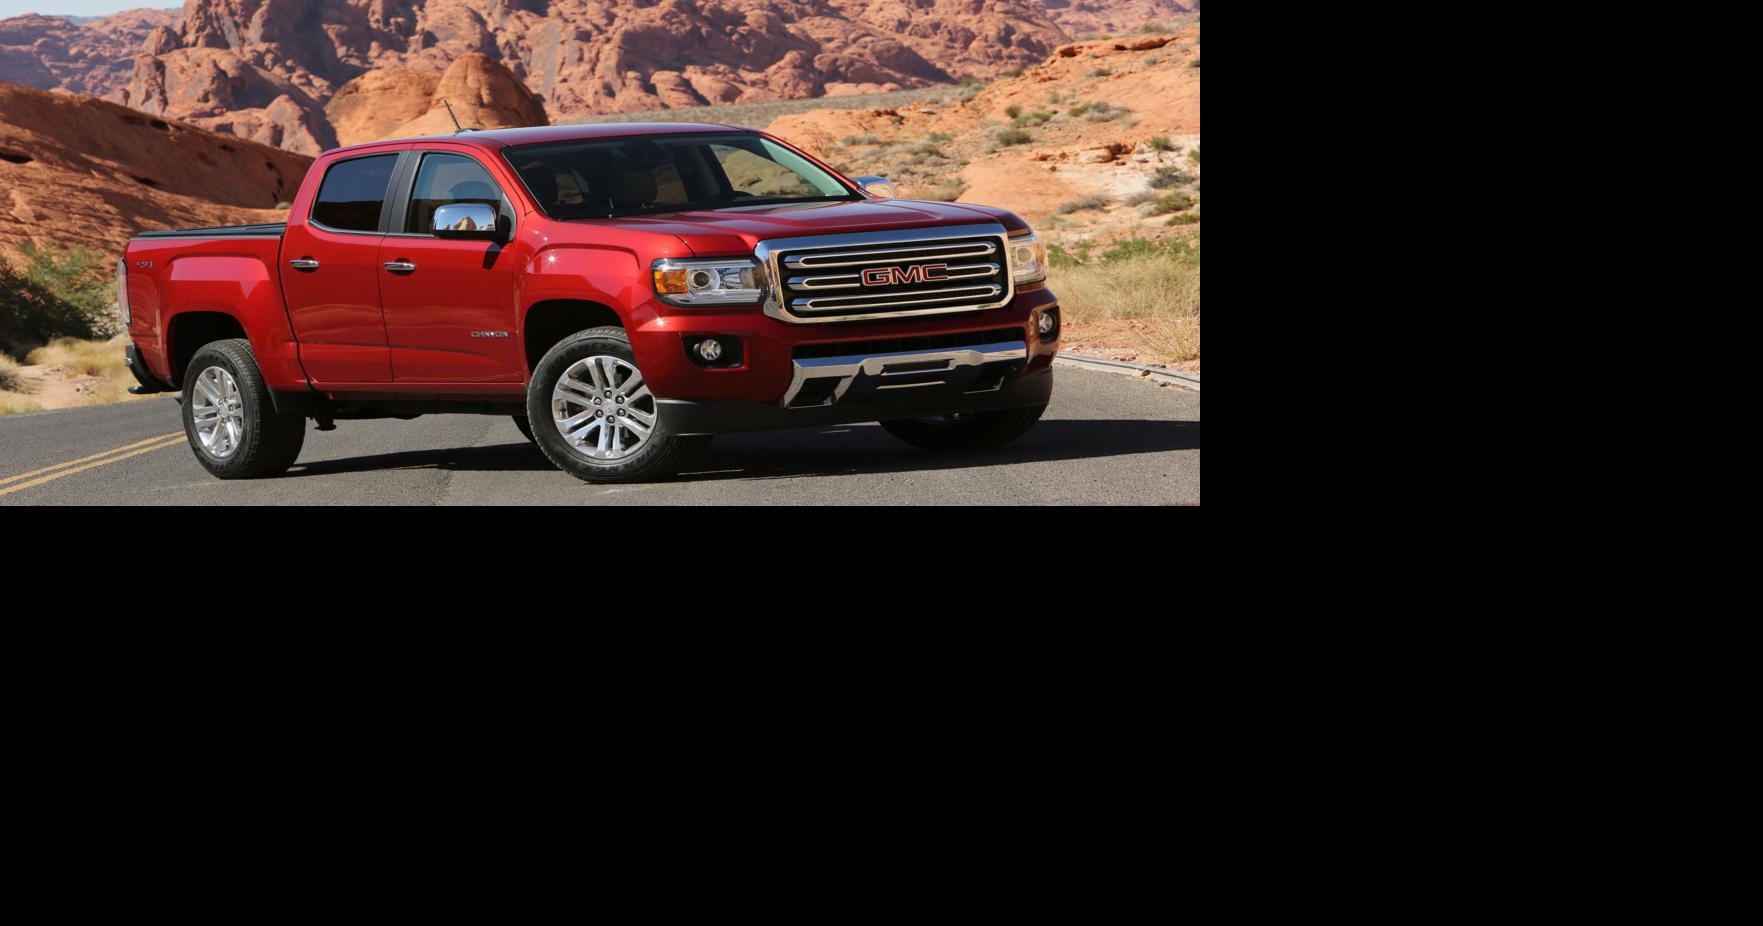 Cars We Remember GMC turbo diesel pickup delivers over 30 mpg easy